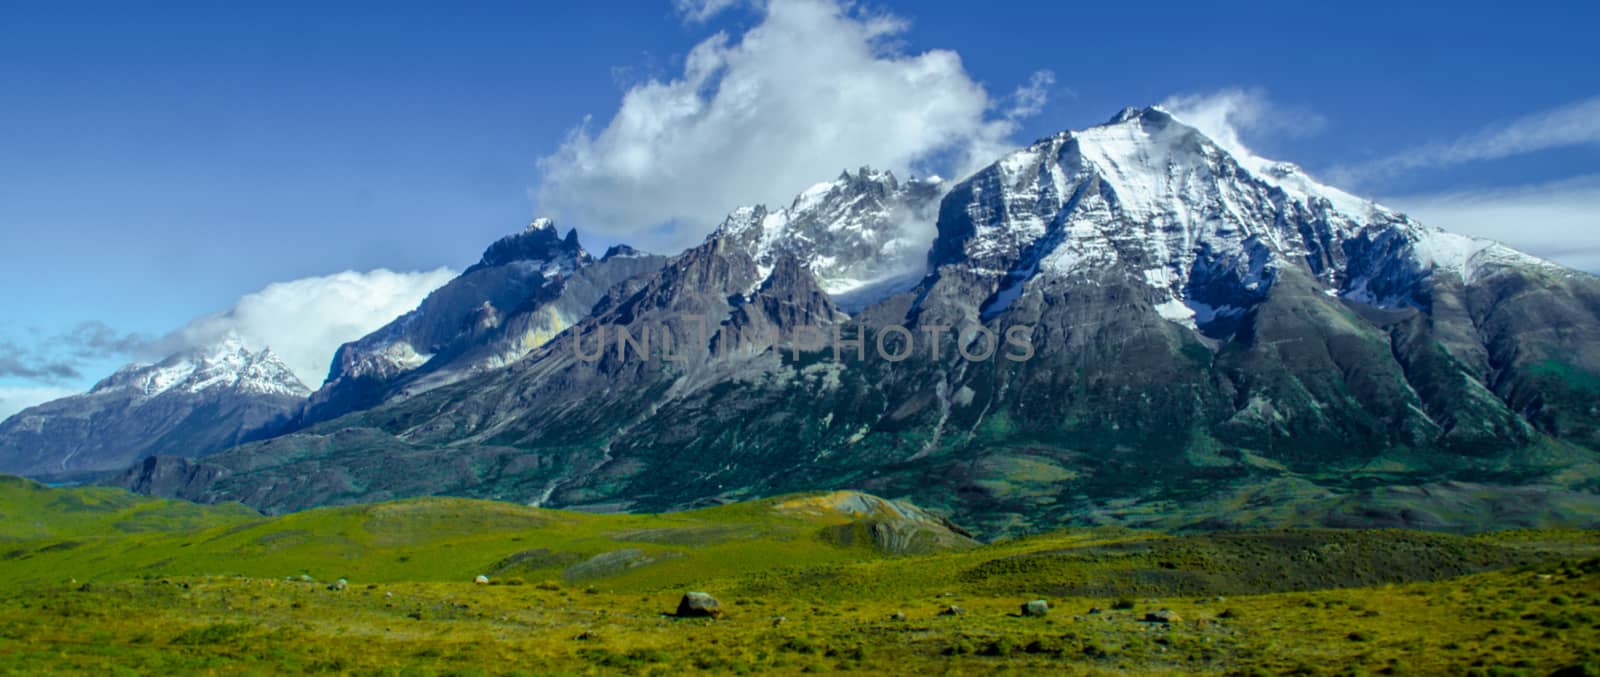 Las Torres del Paine mountains over green grass in Argentina